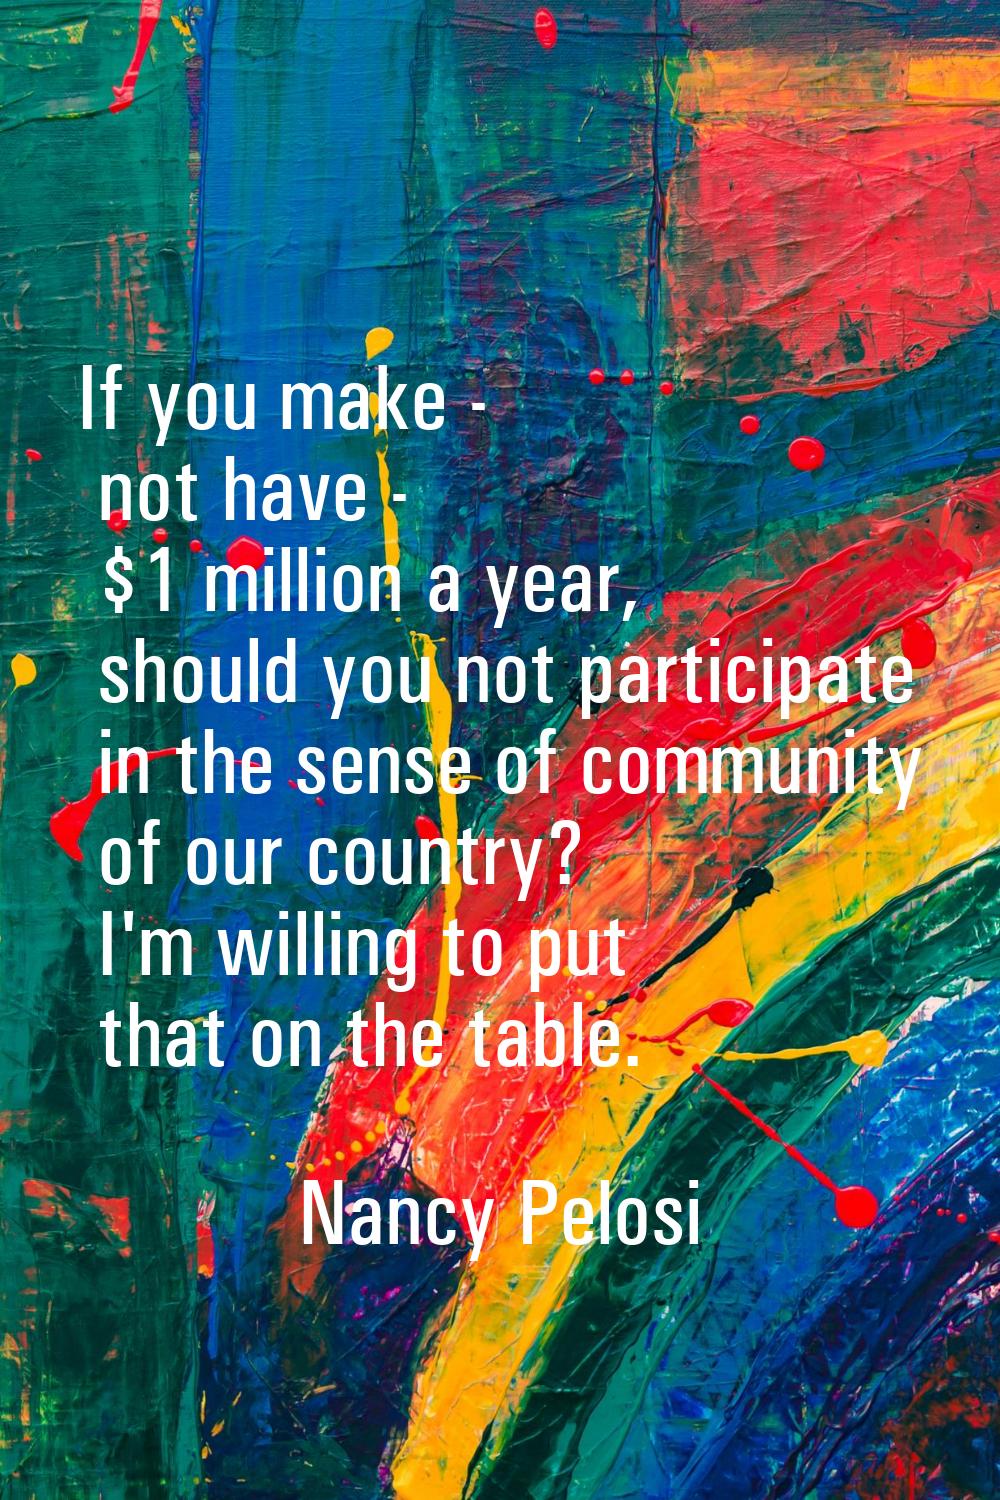 If you make - not have - $1 million a year, should you not participate in the sense of community of